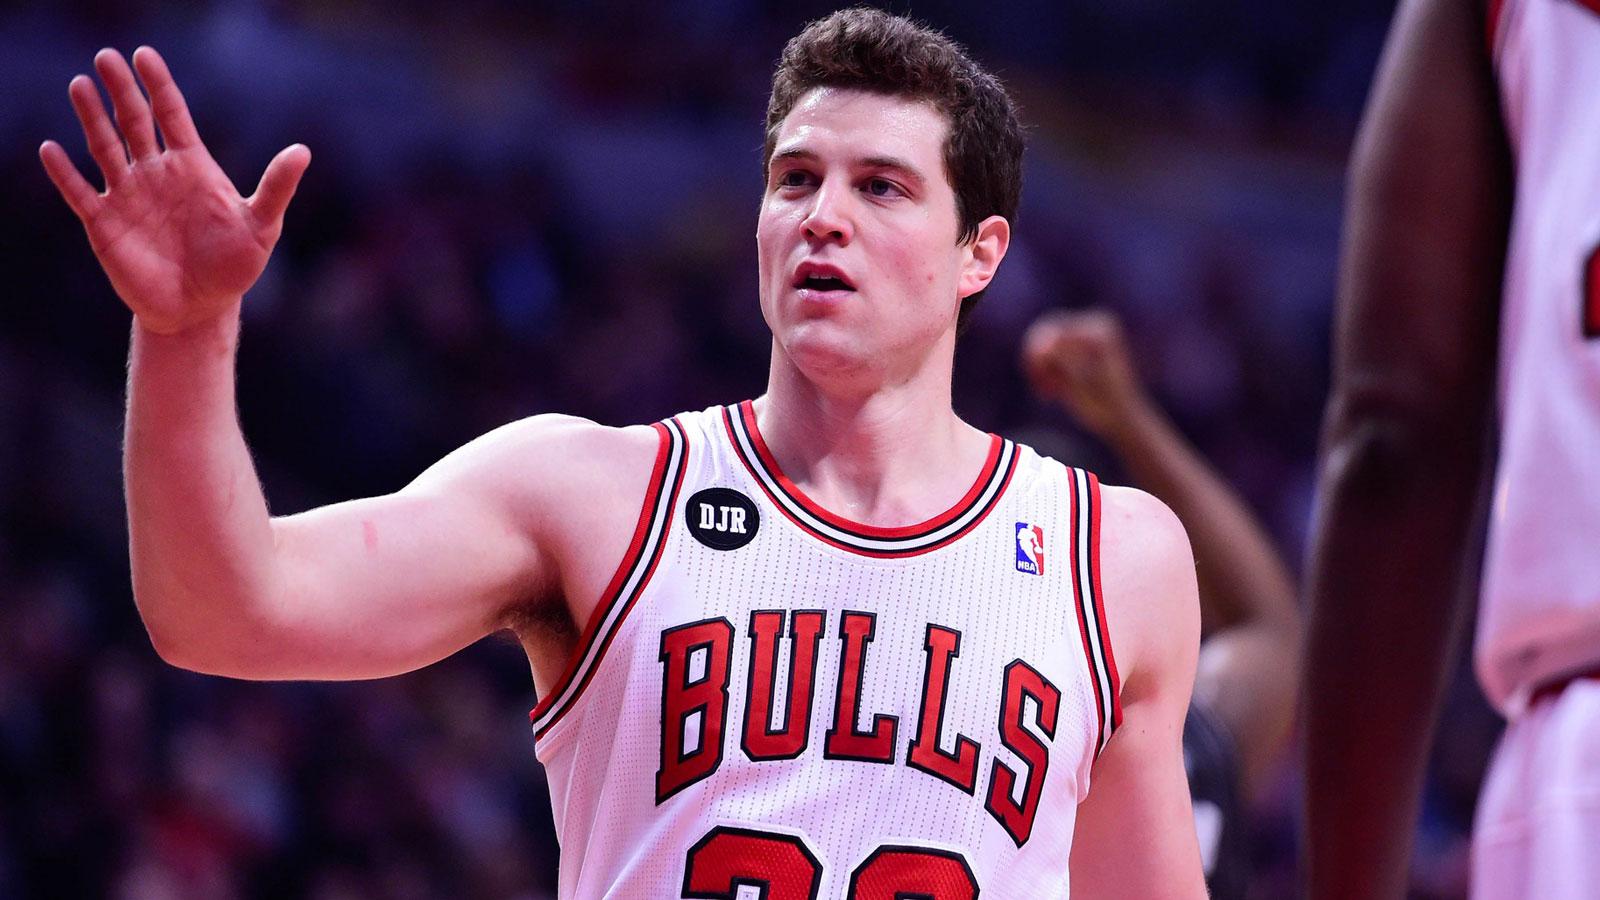 Jimmer Fredette: 'I wasn't expecting this opportunity at all'. FOX